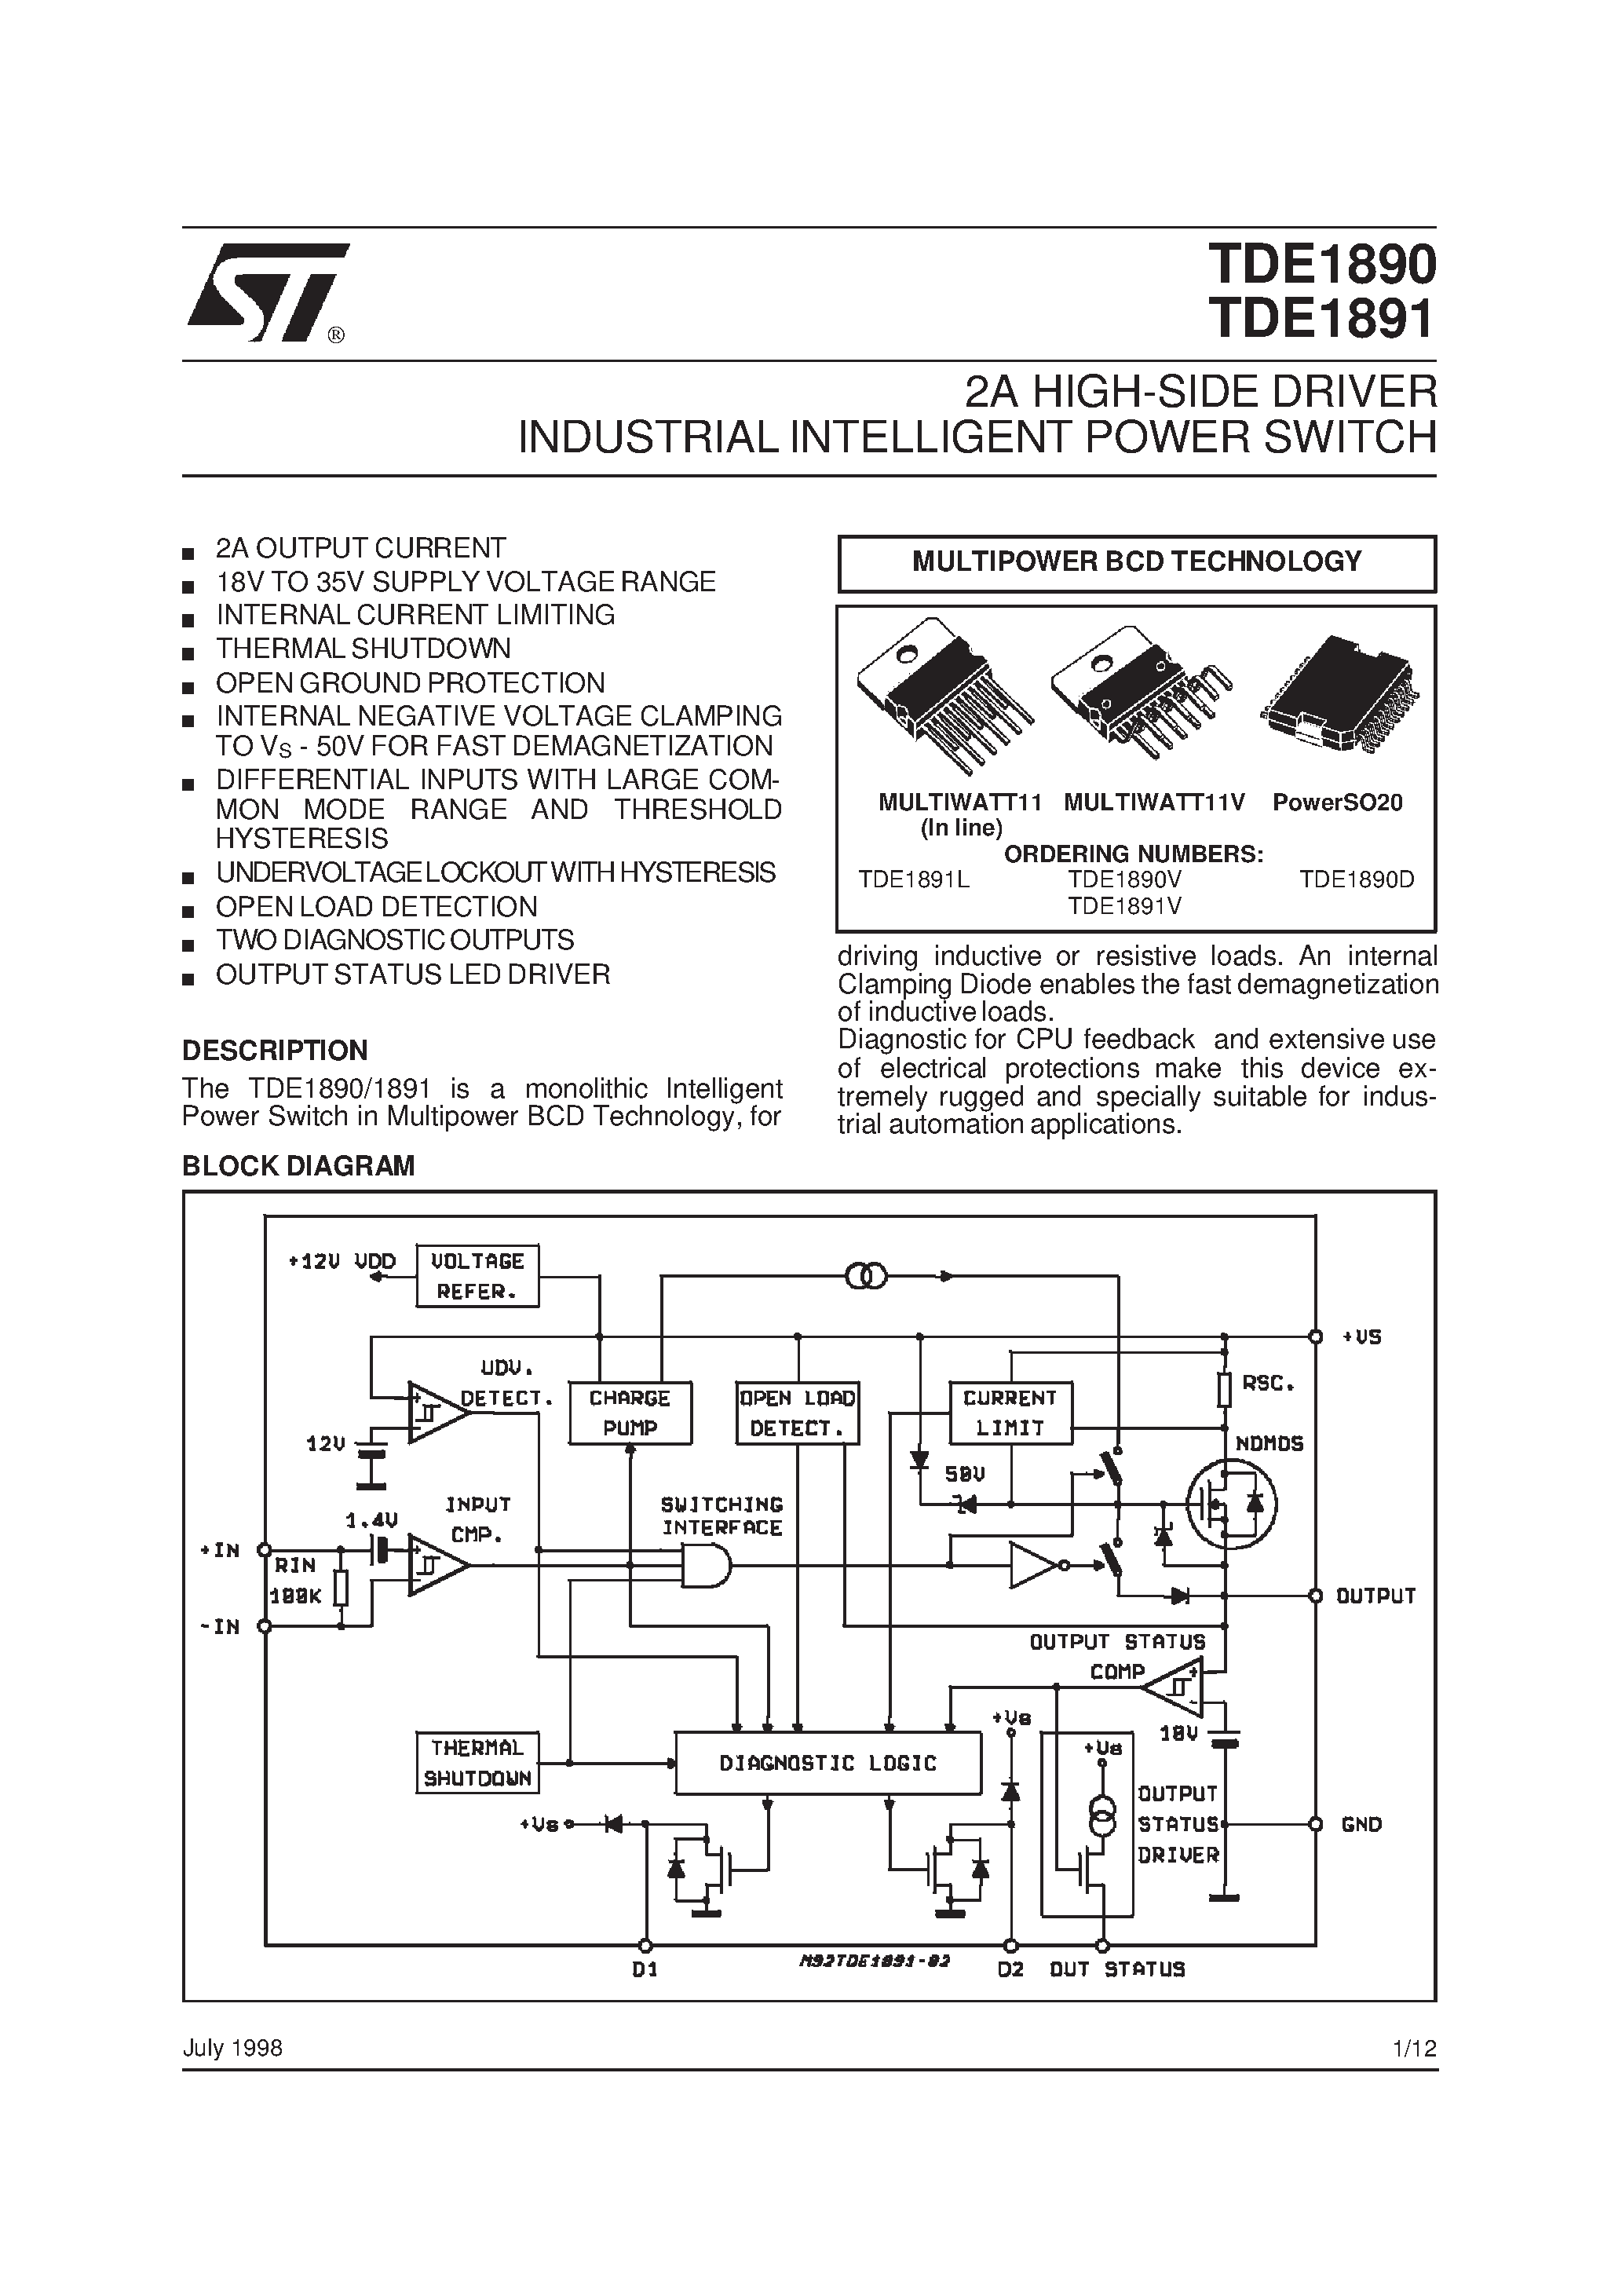 Datasheet TDE1890 - 2A HIGH-SIDE DRIVER INDUSTRIAL INTELLIGENT POWER SWITCH page 1